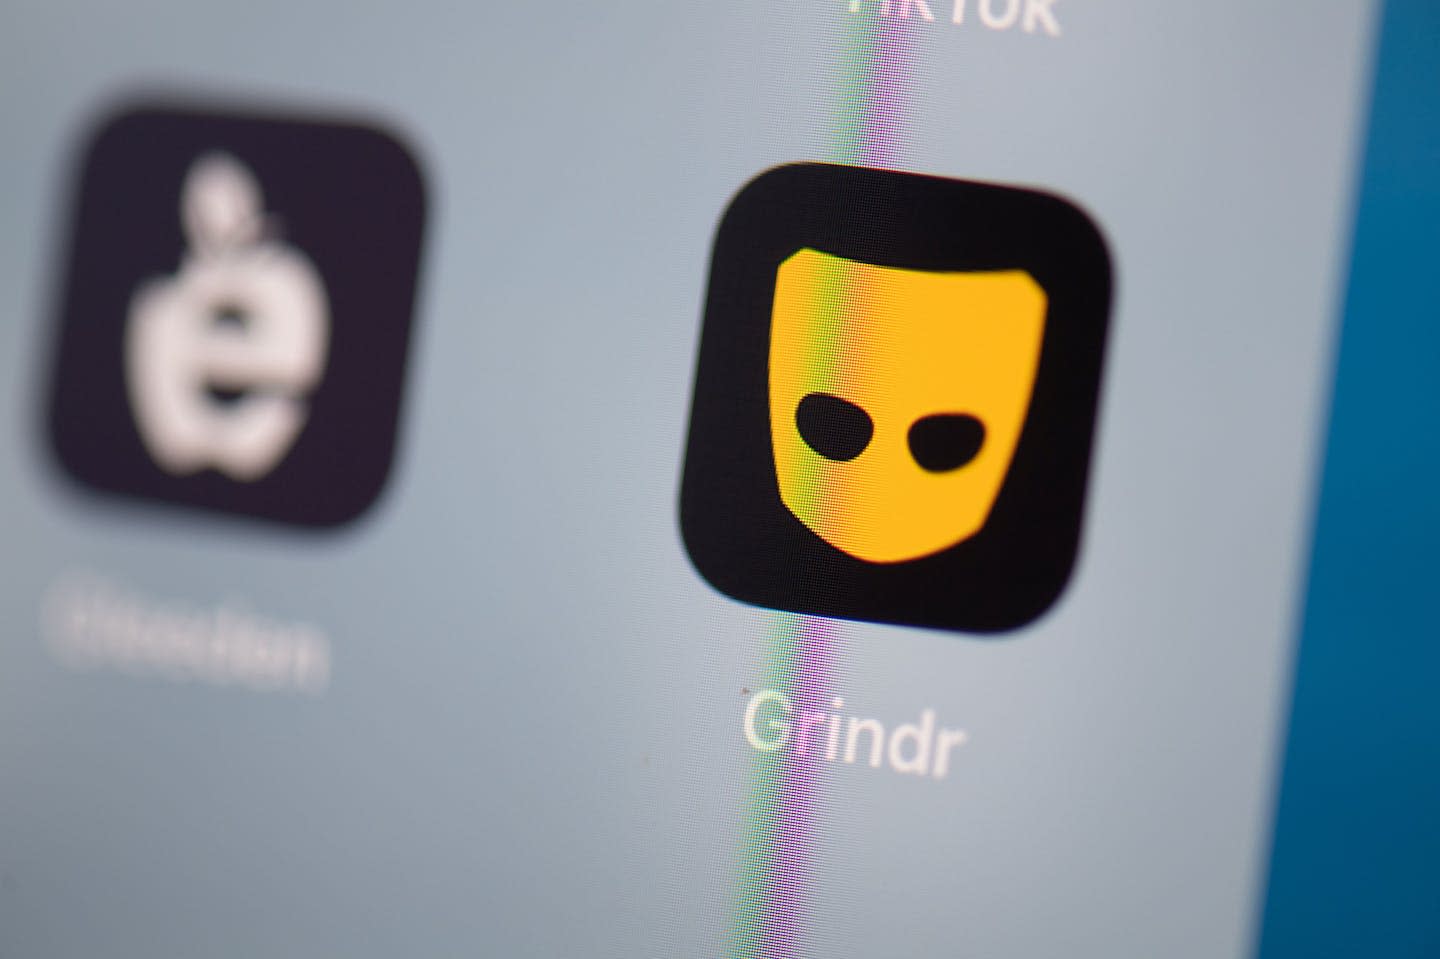 Grindr sound change notification How to